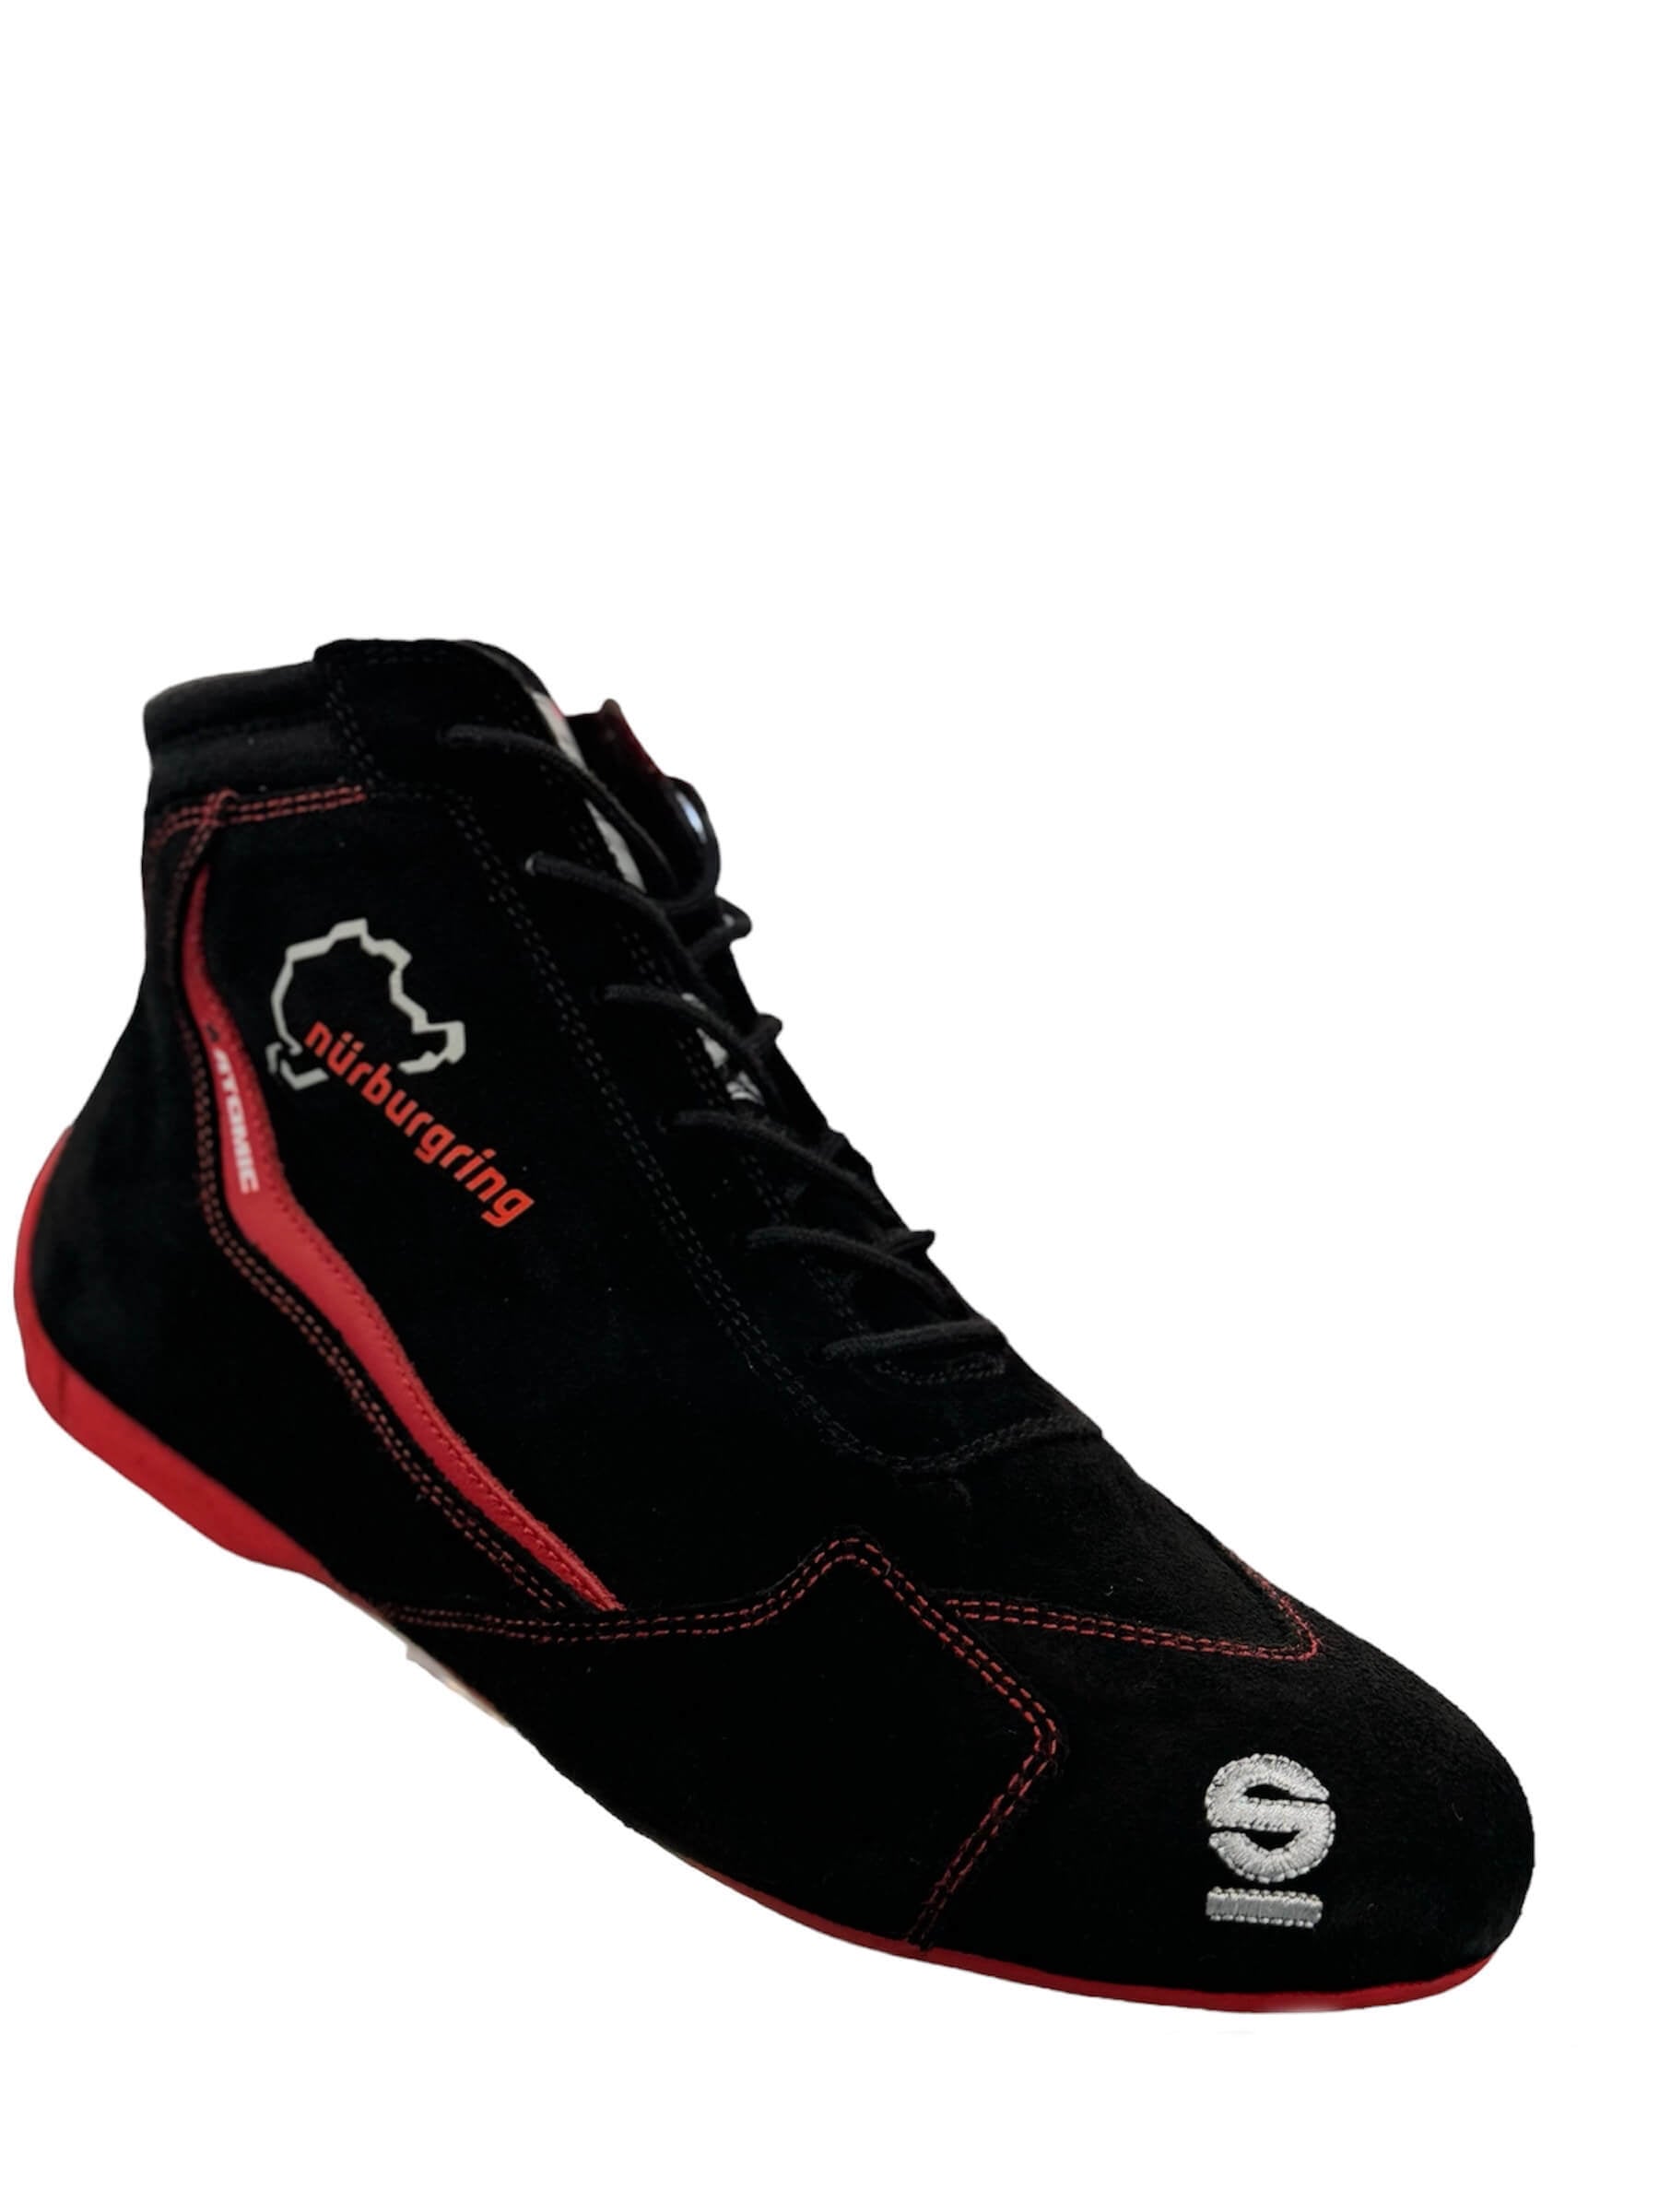 SPARCO 001295SP_NBR41 Shoes Slalom Nurburgring Edition black/red Size 41 Photo-0 